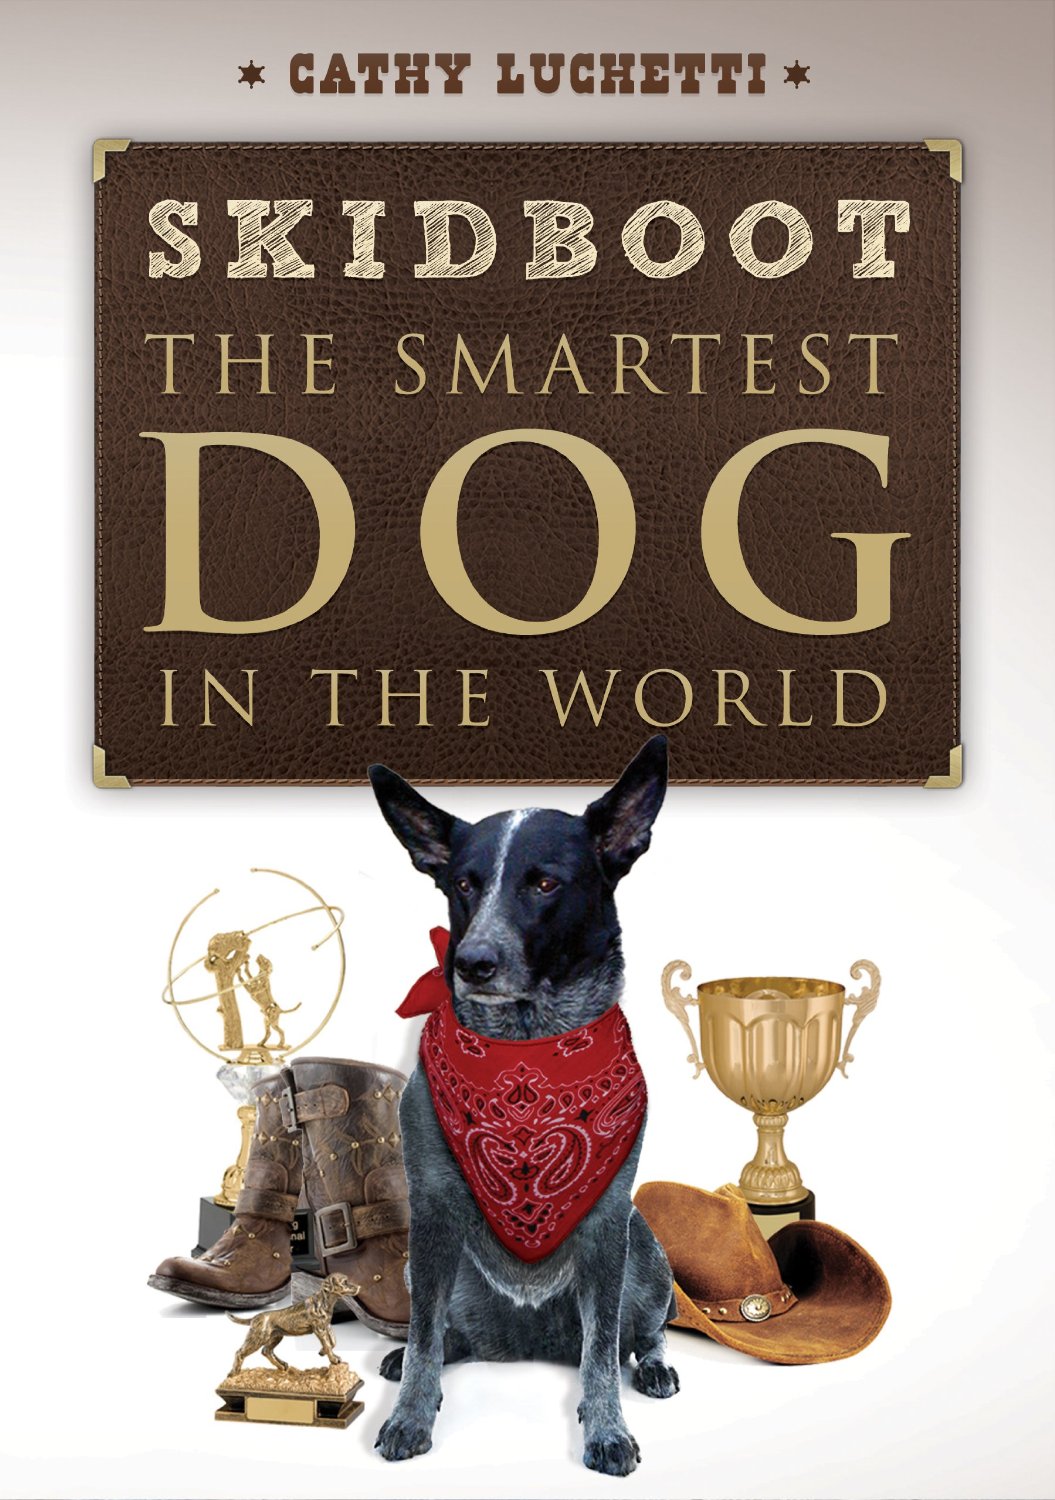 Skidboot ‘The Smartest Dog In The World’ by Cathy Luchetti